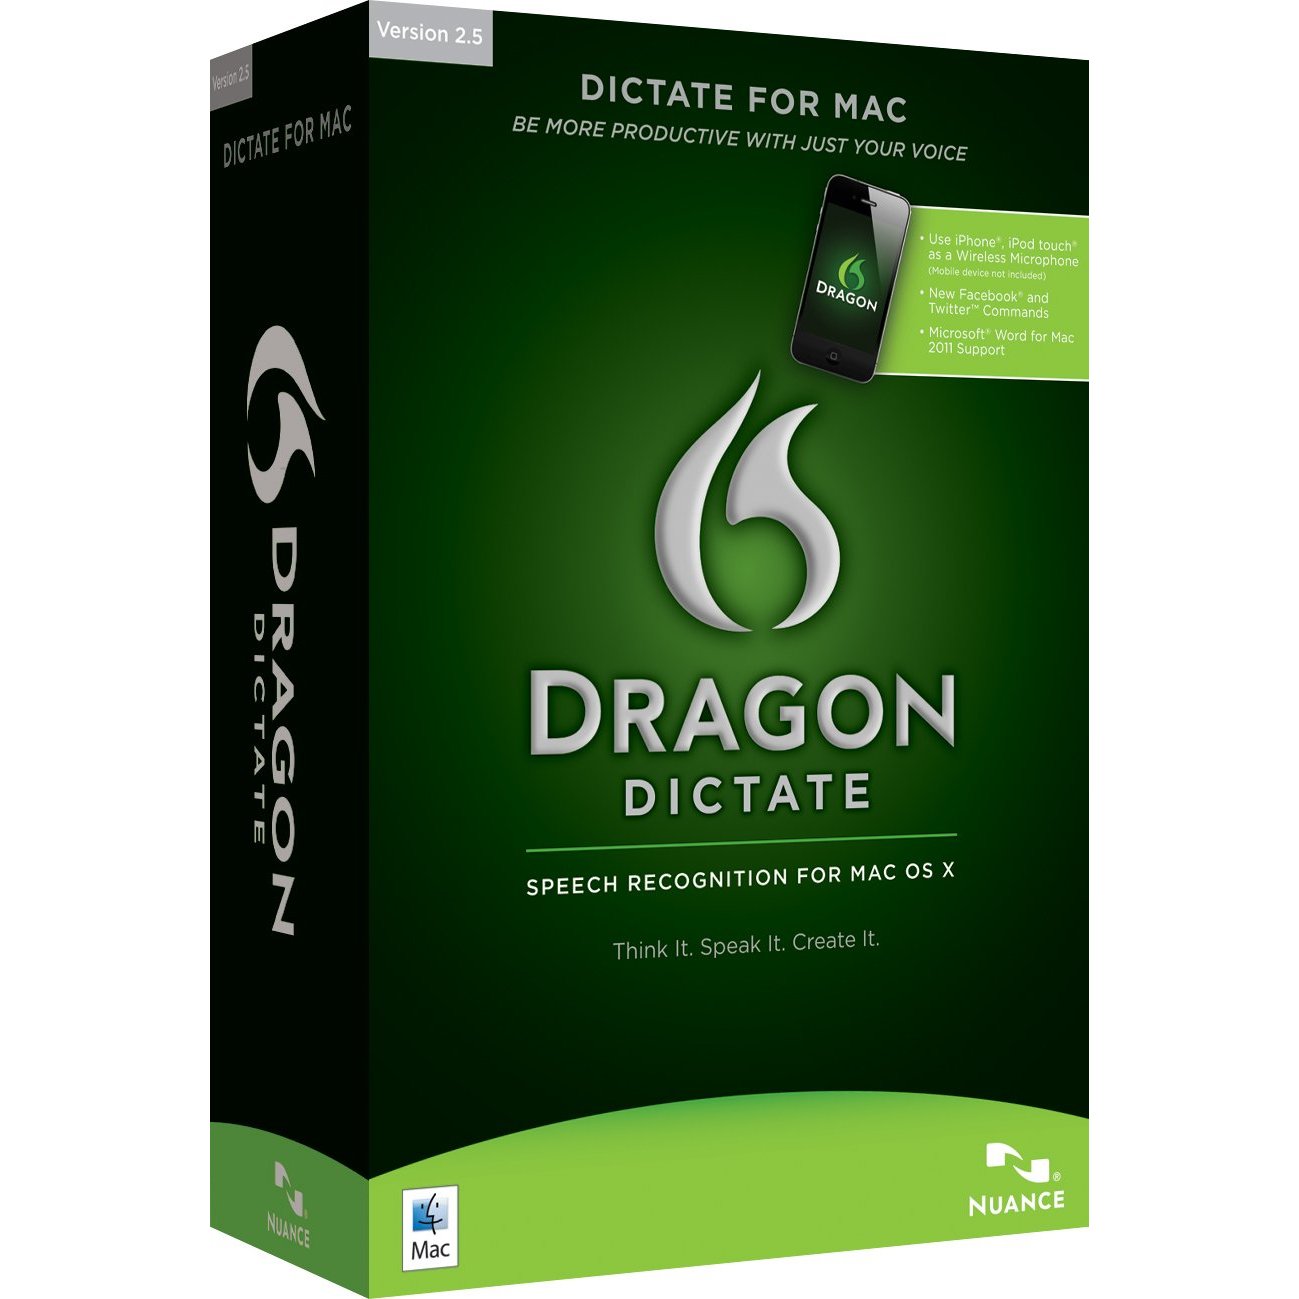 Dragon dictation free download for mac windows 10